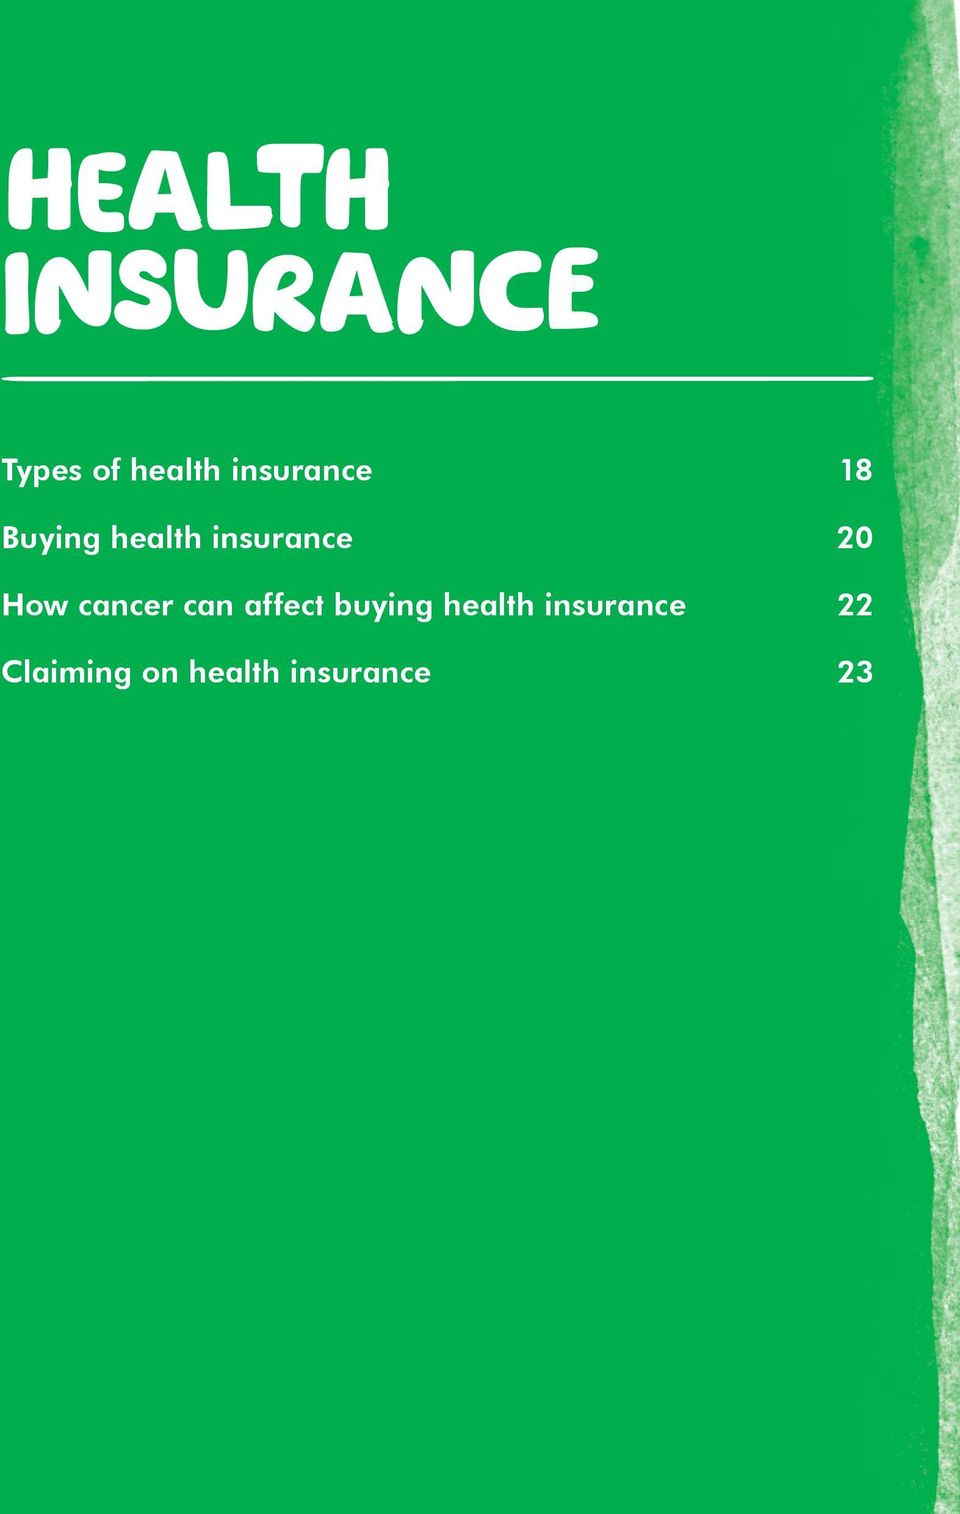 insurance 20 How cancer can affect buying